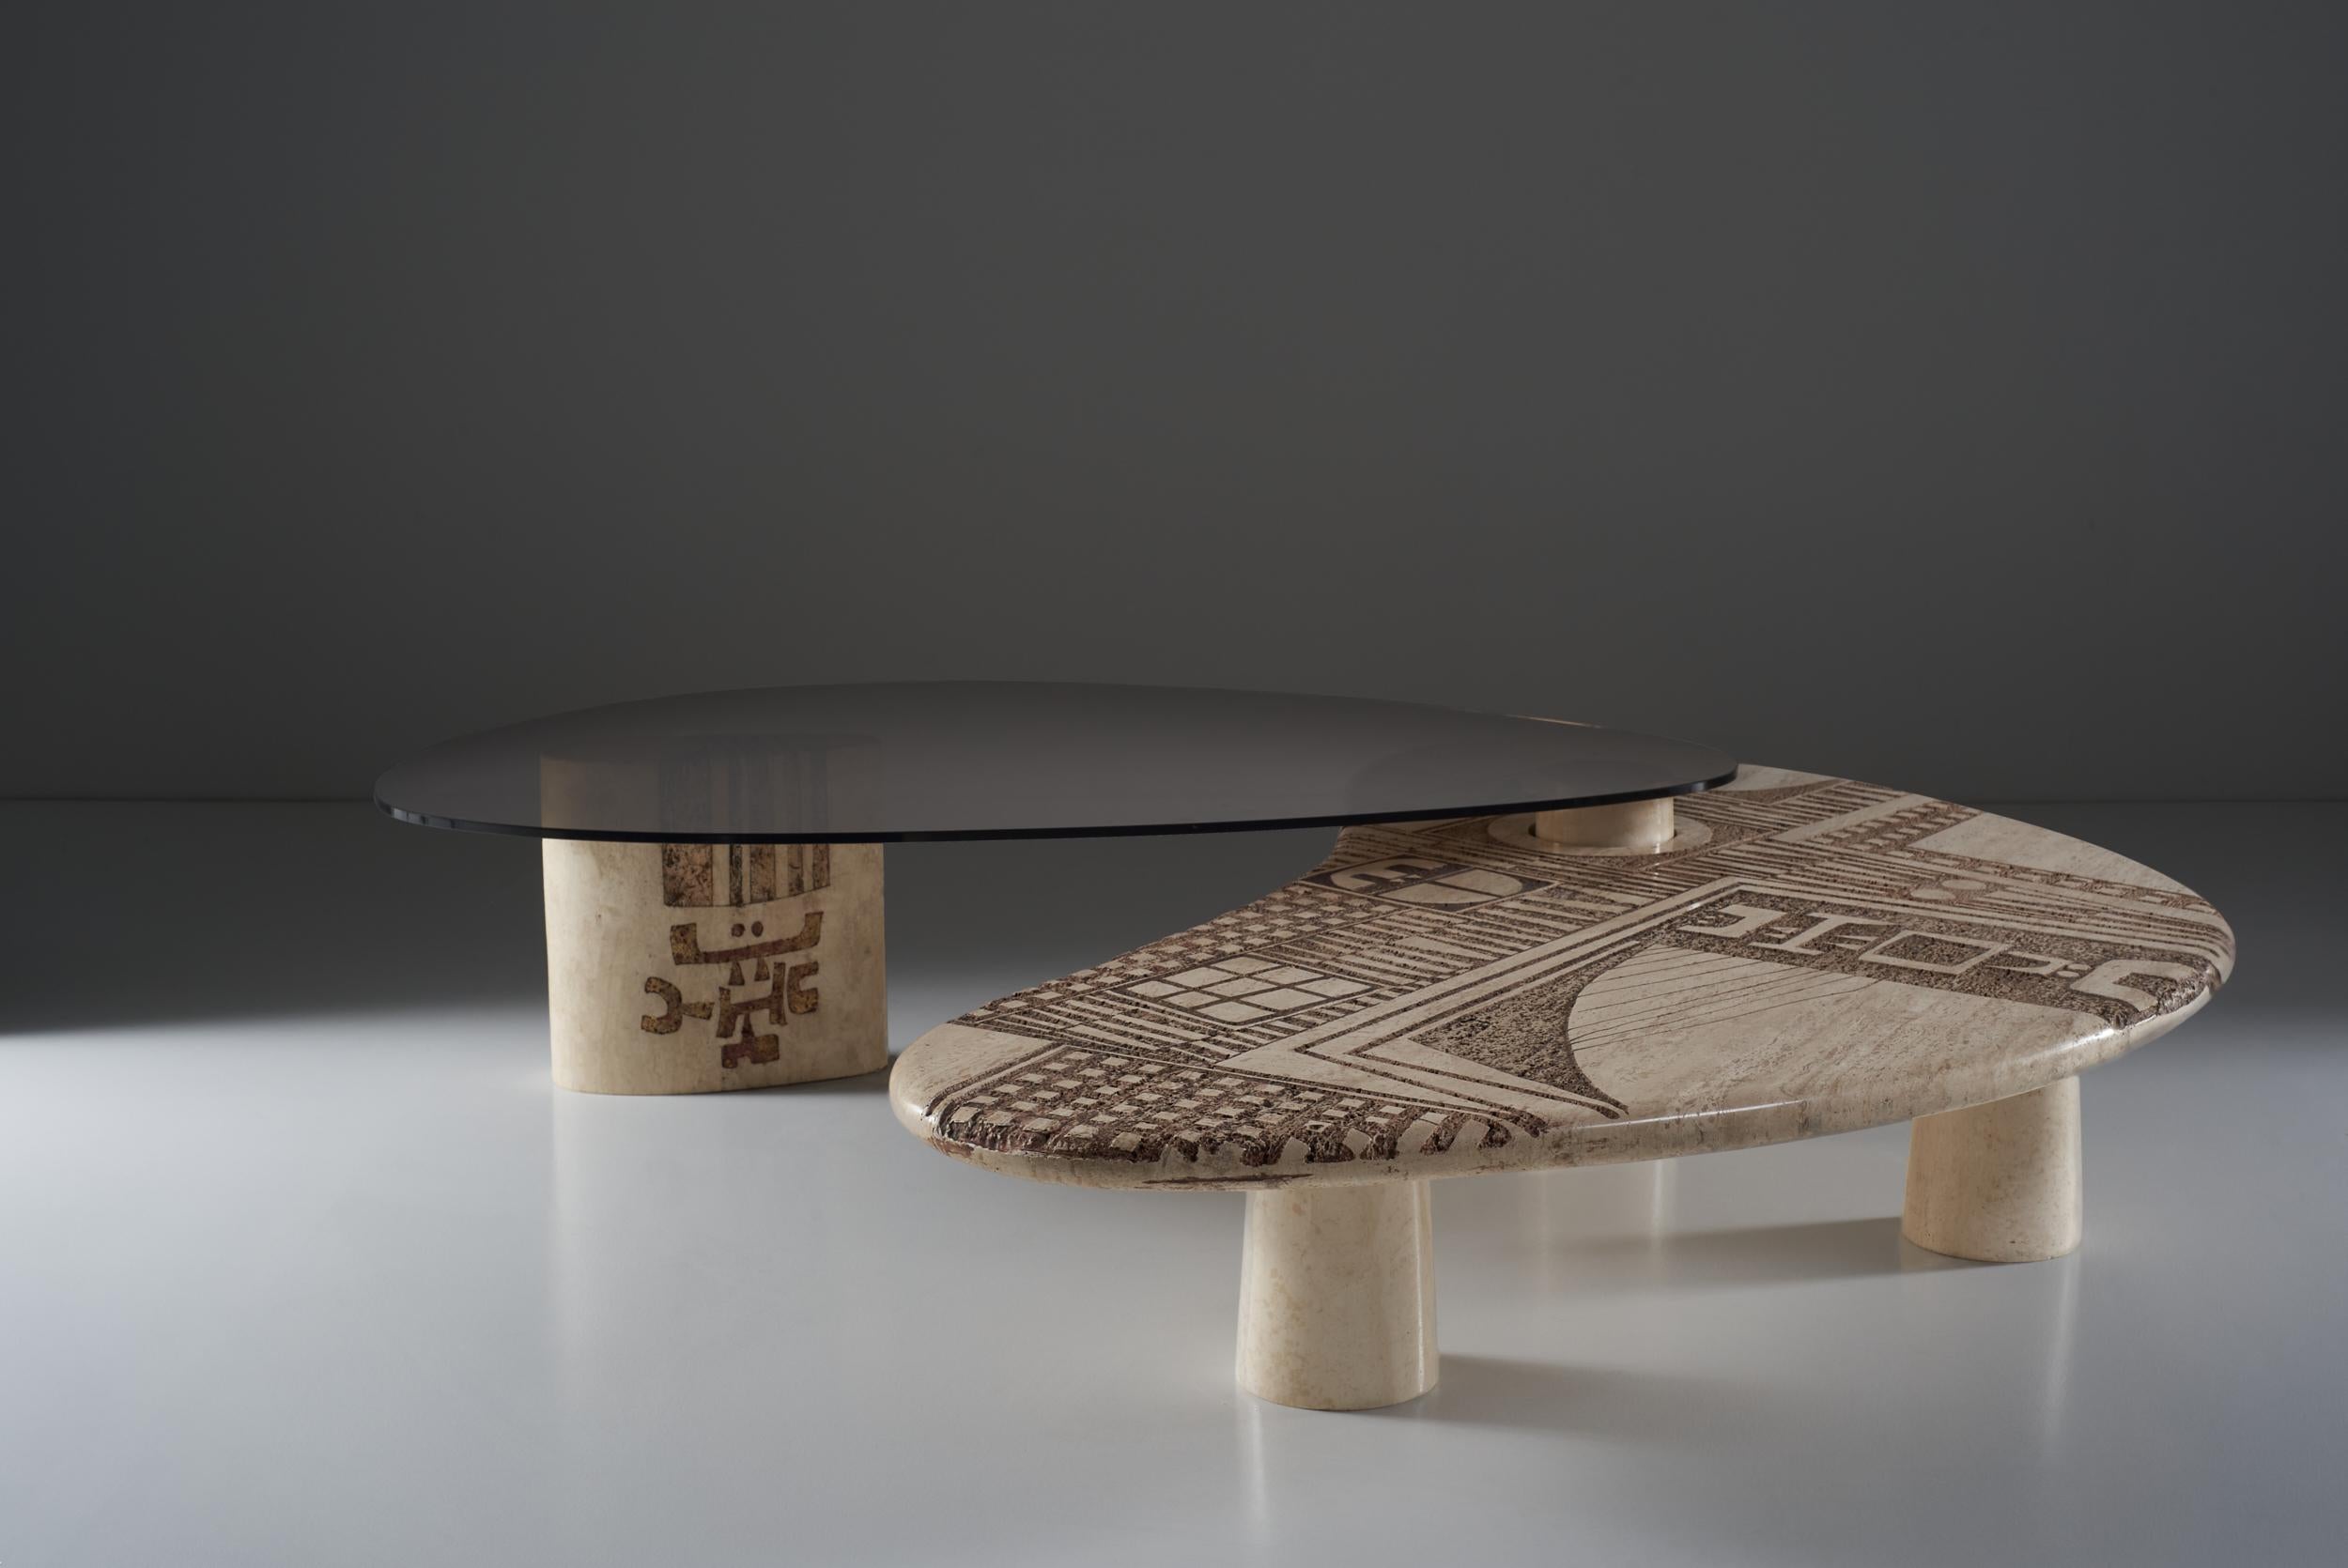 The table designed by Nerone Patuzzi is a deeply malleable table despite the apparent rigidity of marble. The possibility to compose and adapt the table to one's own needs, implies a perimeter area within which it can rotate. The engraved marble,